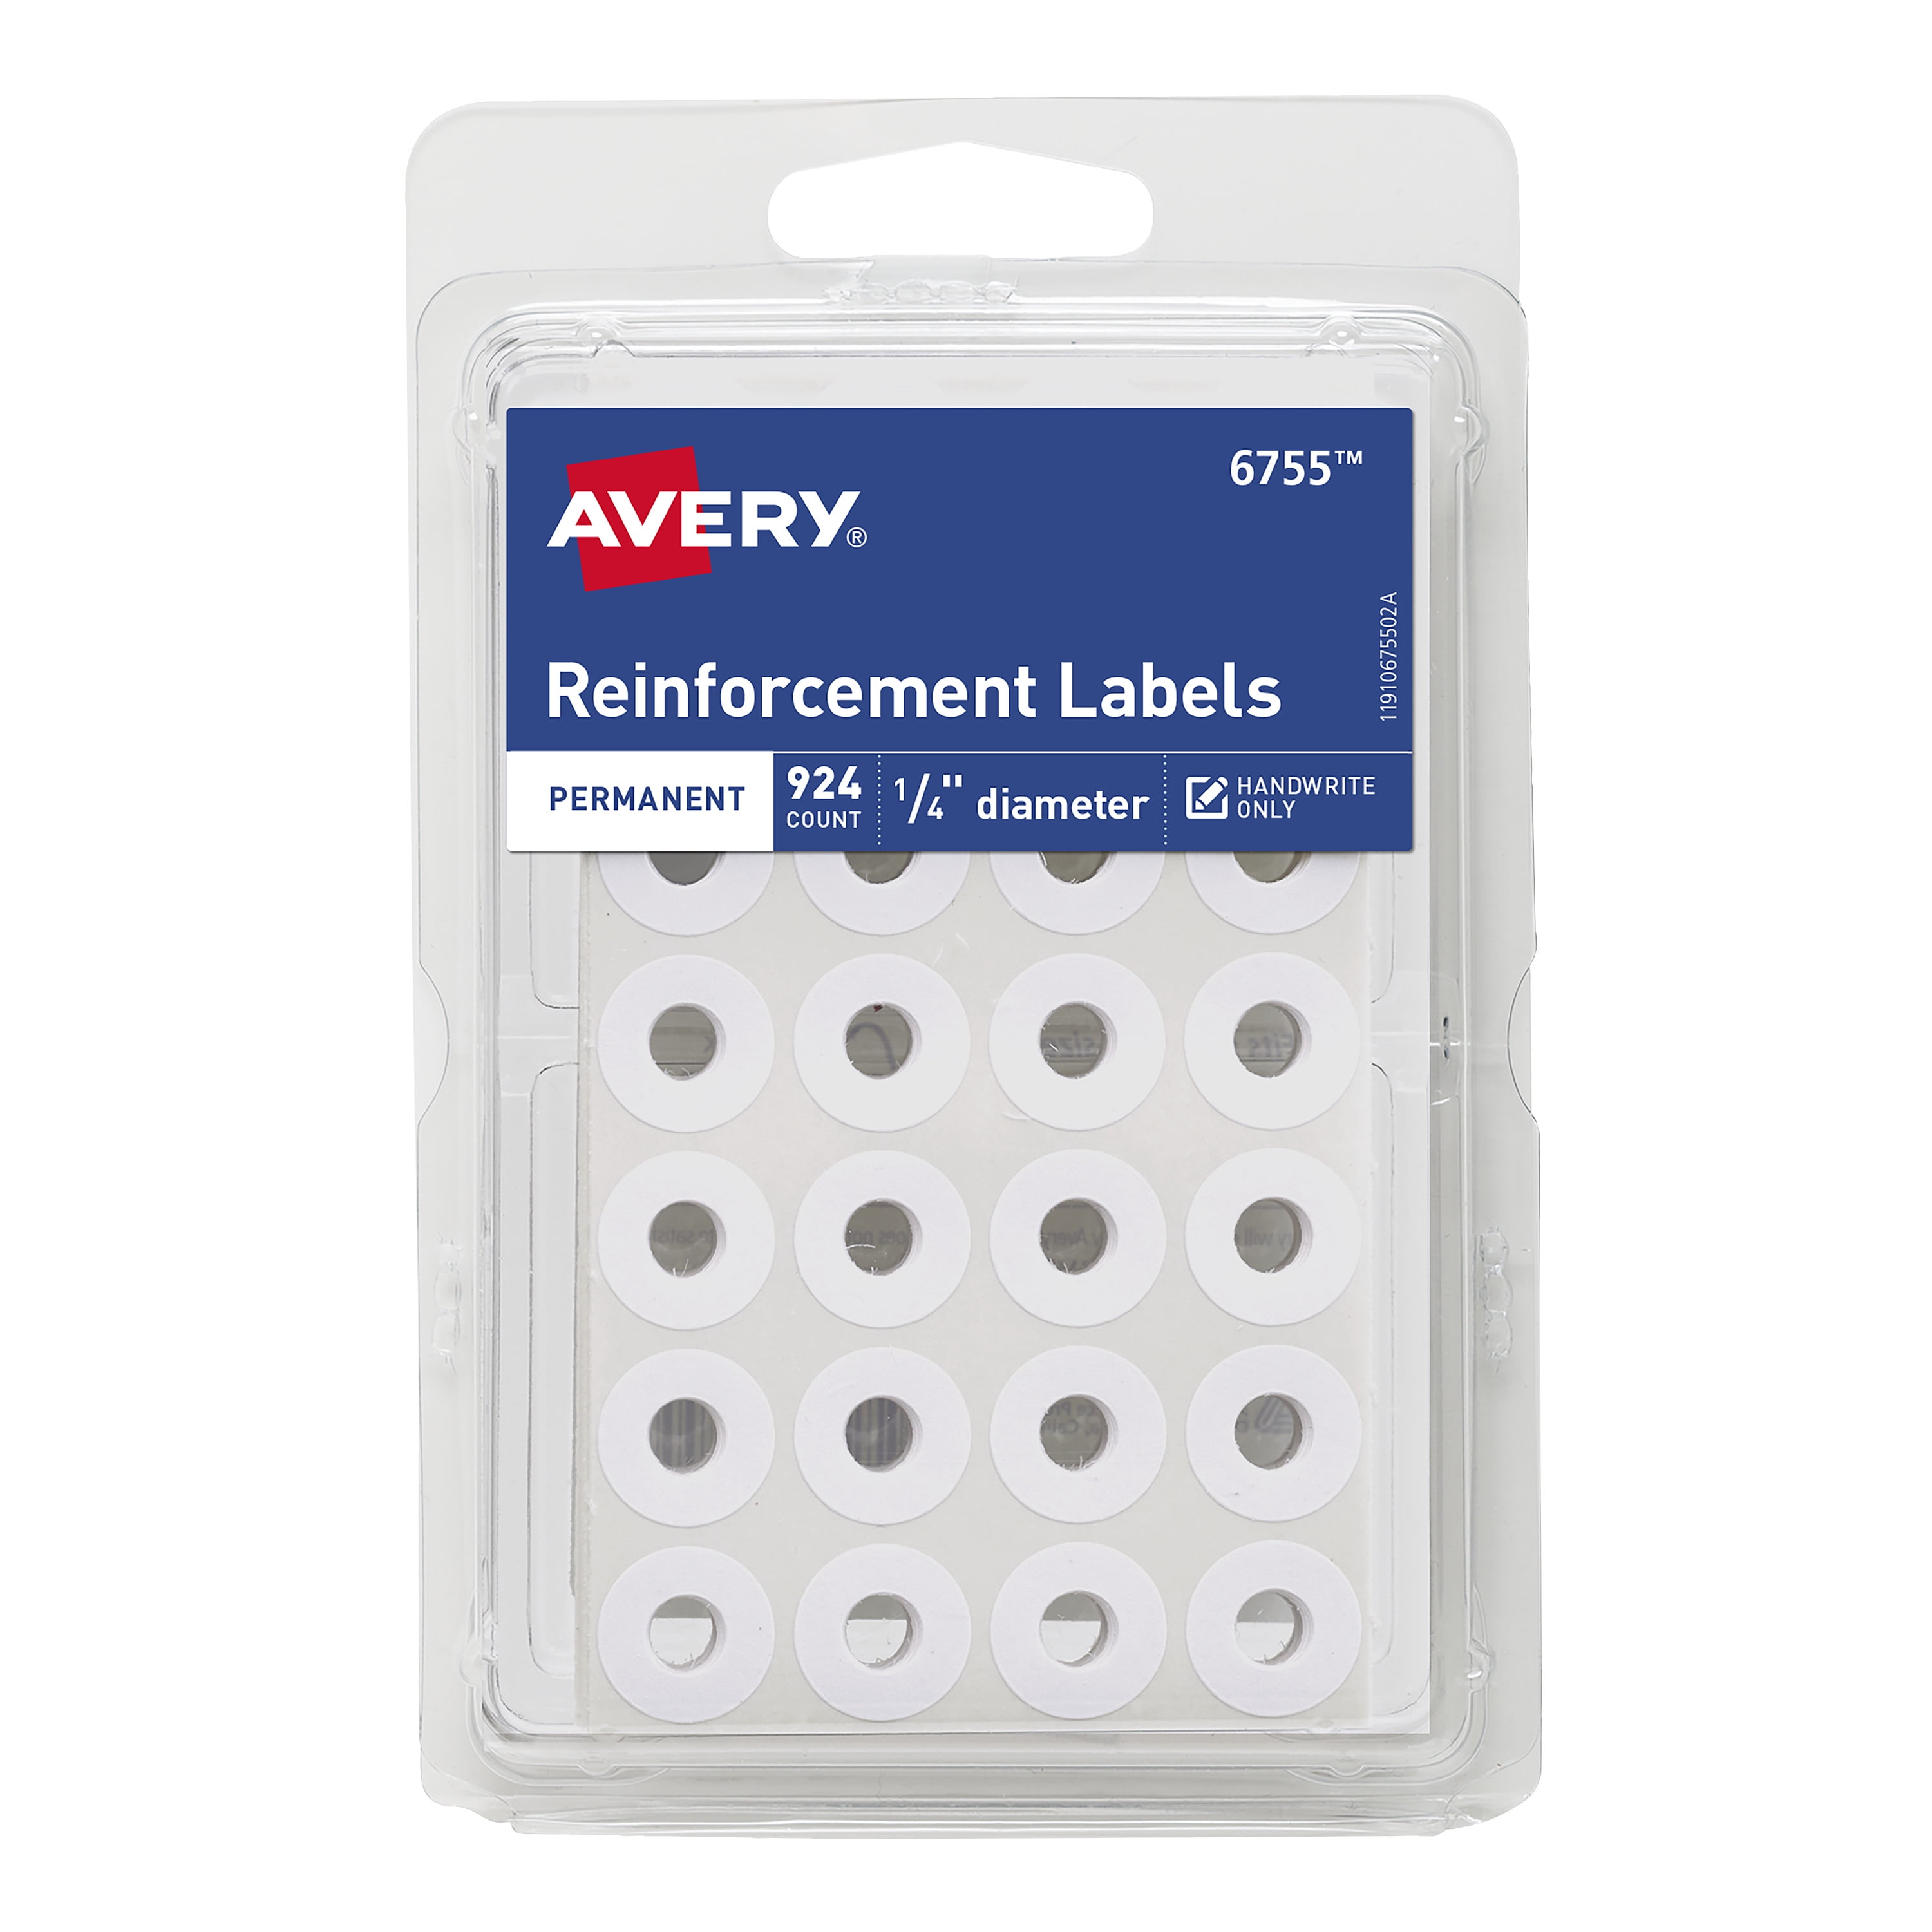 Avery Round Reinforcement Labels, White, 1/4", Permanent, 924 Reinforcements (06755)